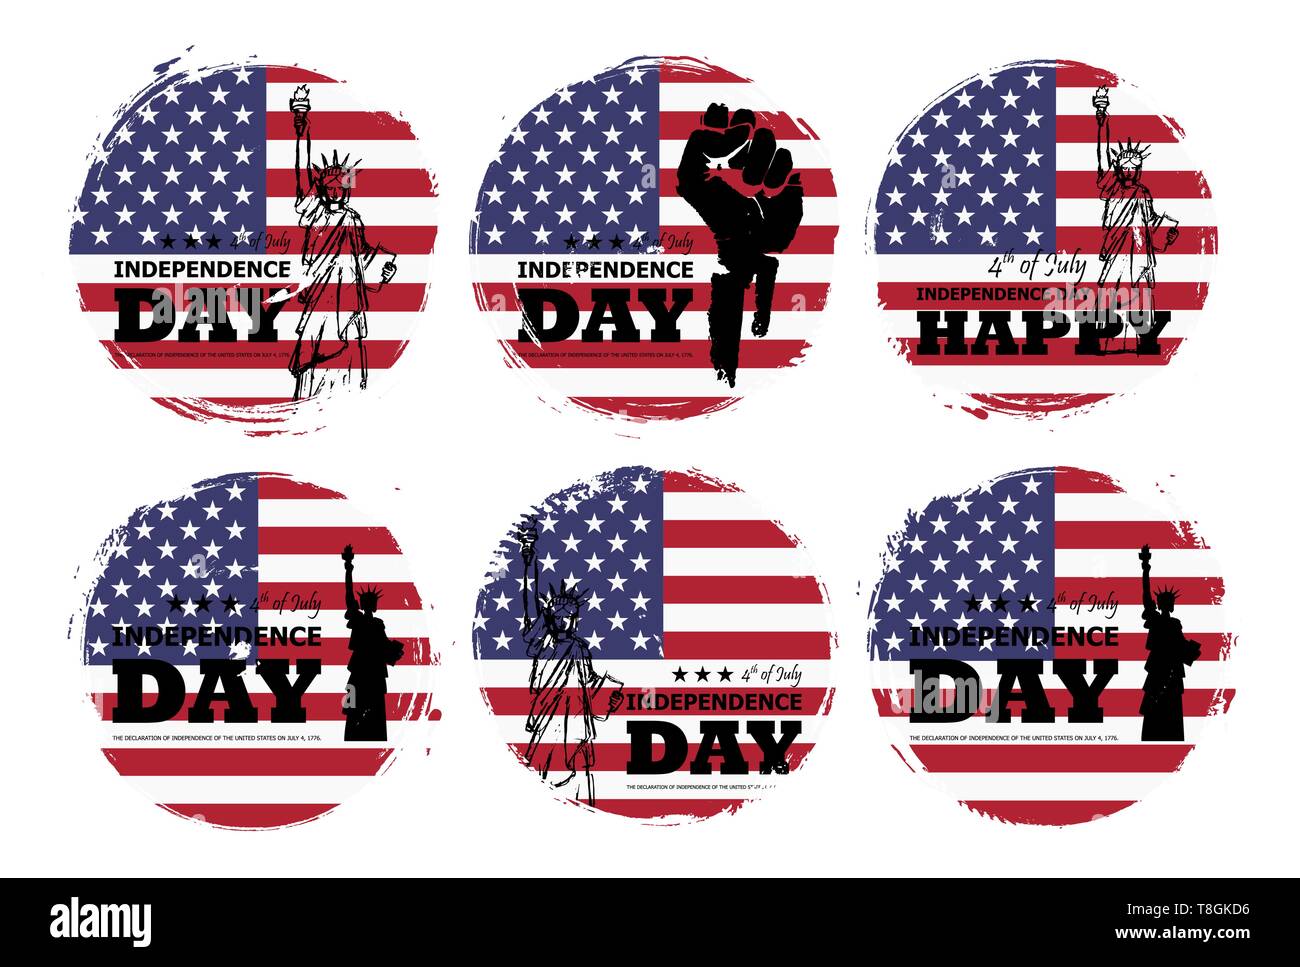 4th of July independence day of USA . Set of various grunge circle shape with america flag and statue of liberty drawing design . Elements vector Stock Vector